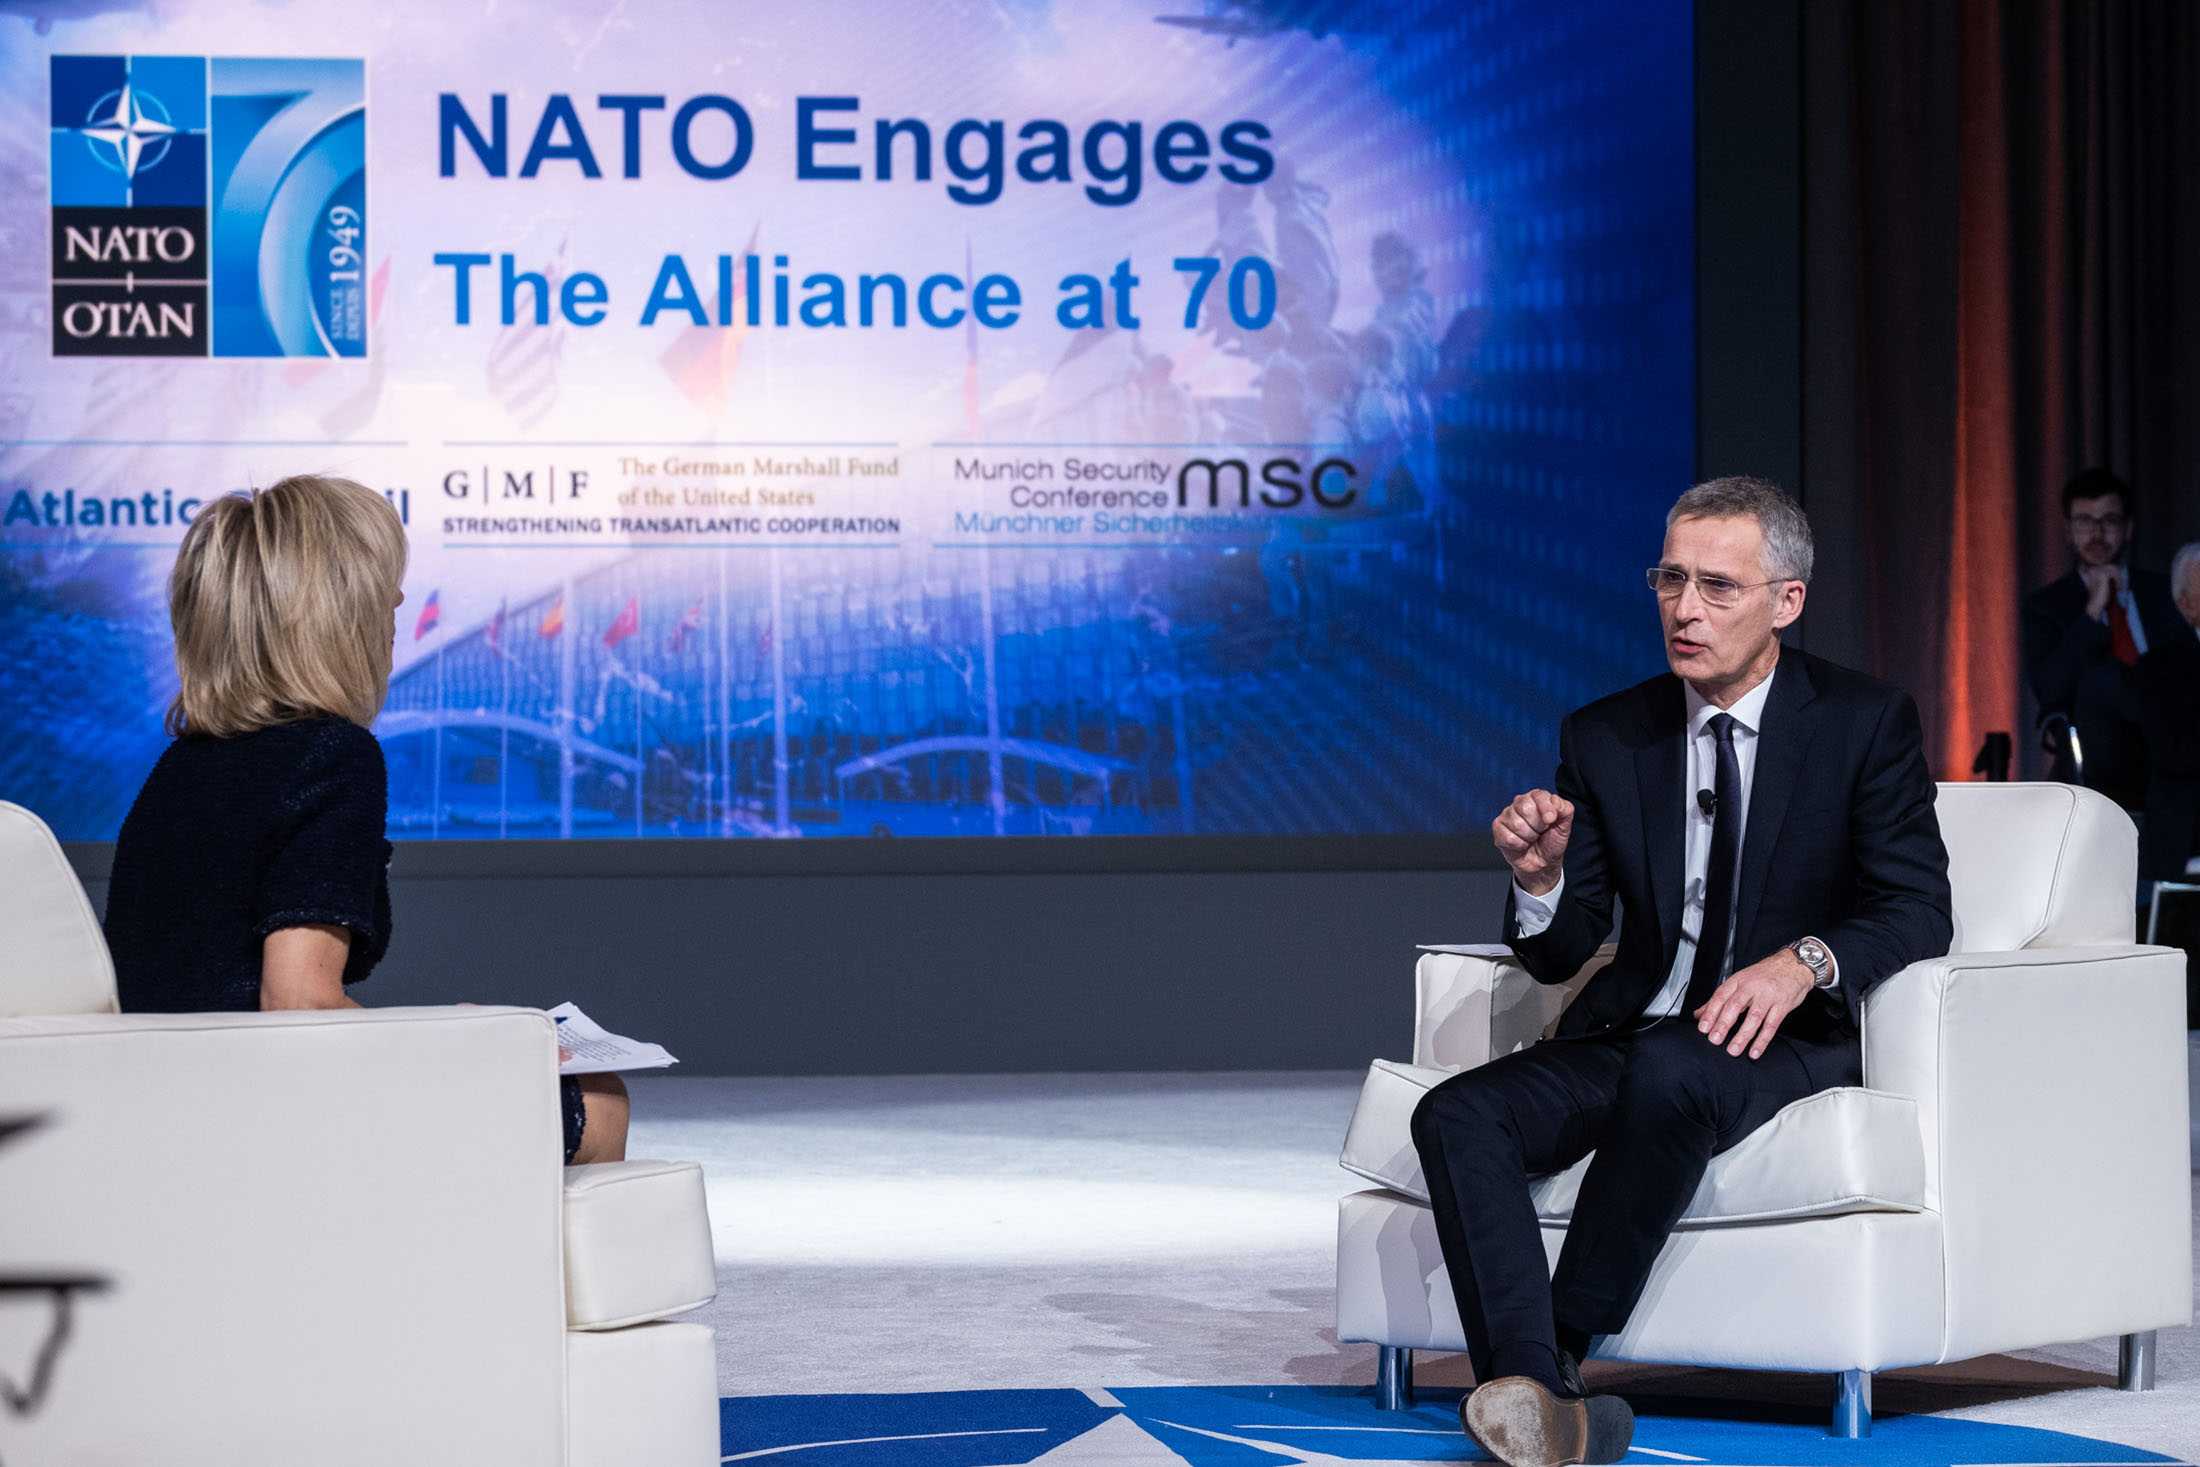 After 70 Years, What Happens to NATO Next?